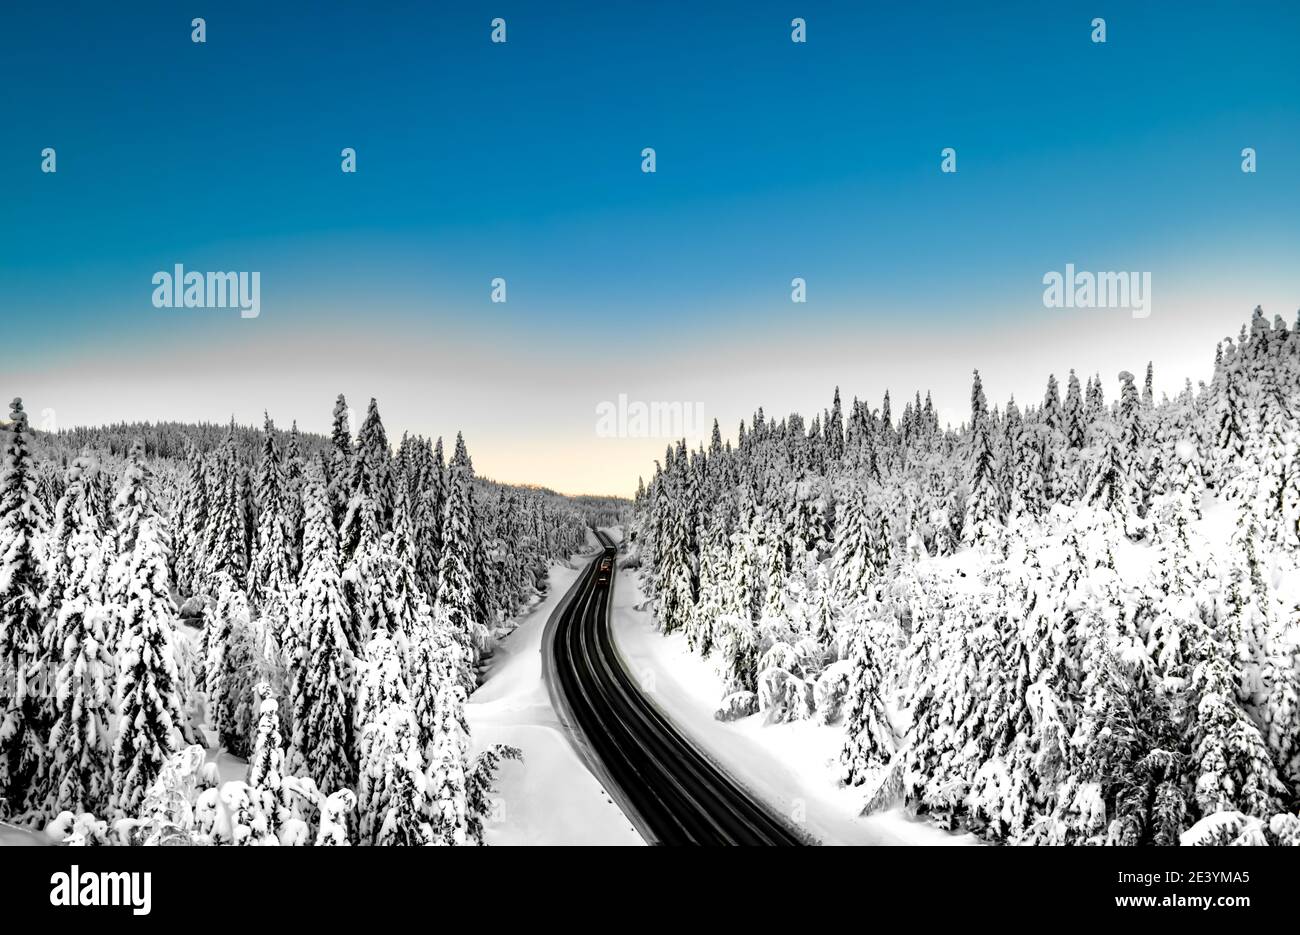 Highway with cars driving through a mountain pass with snow covered trees. Stock Photo